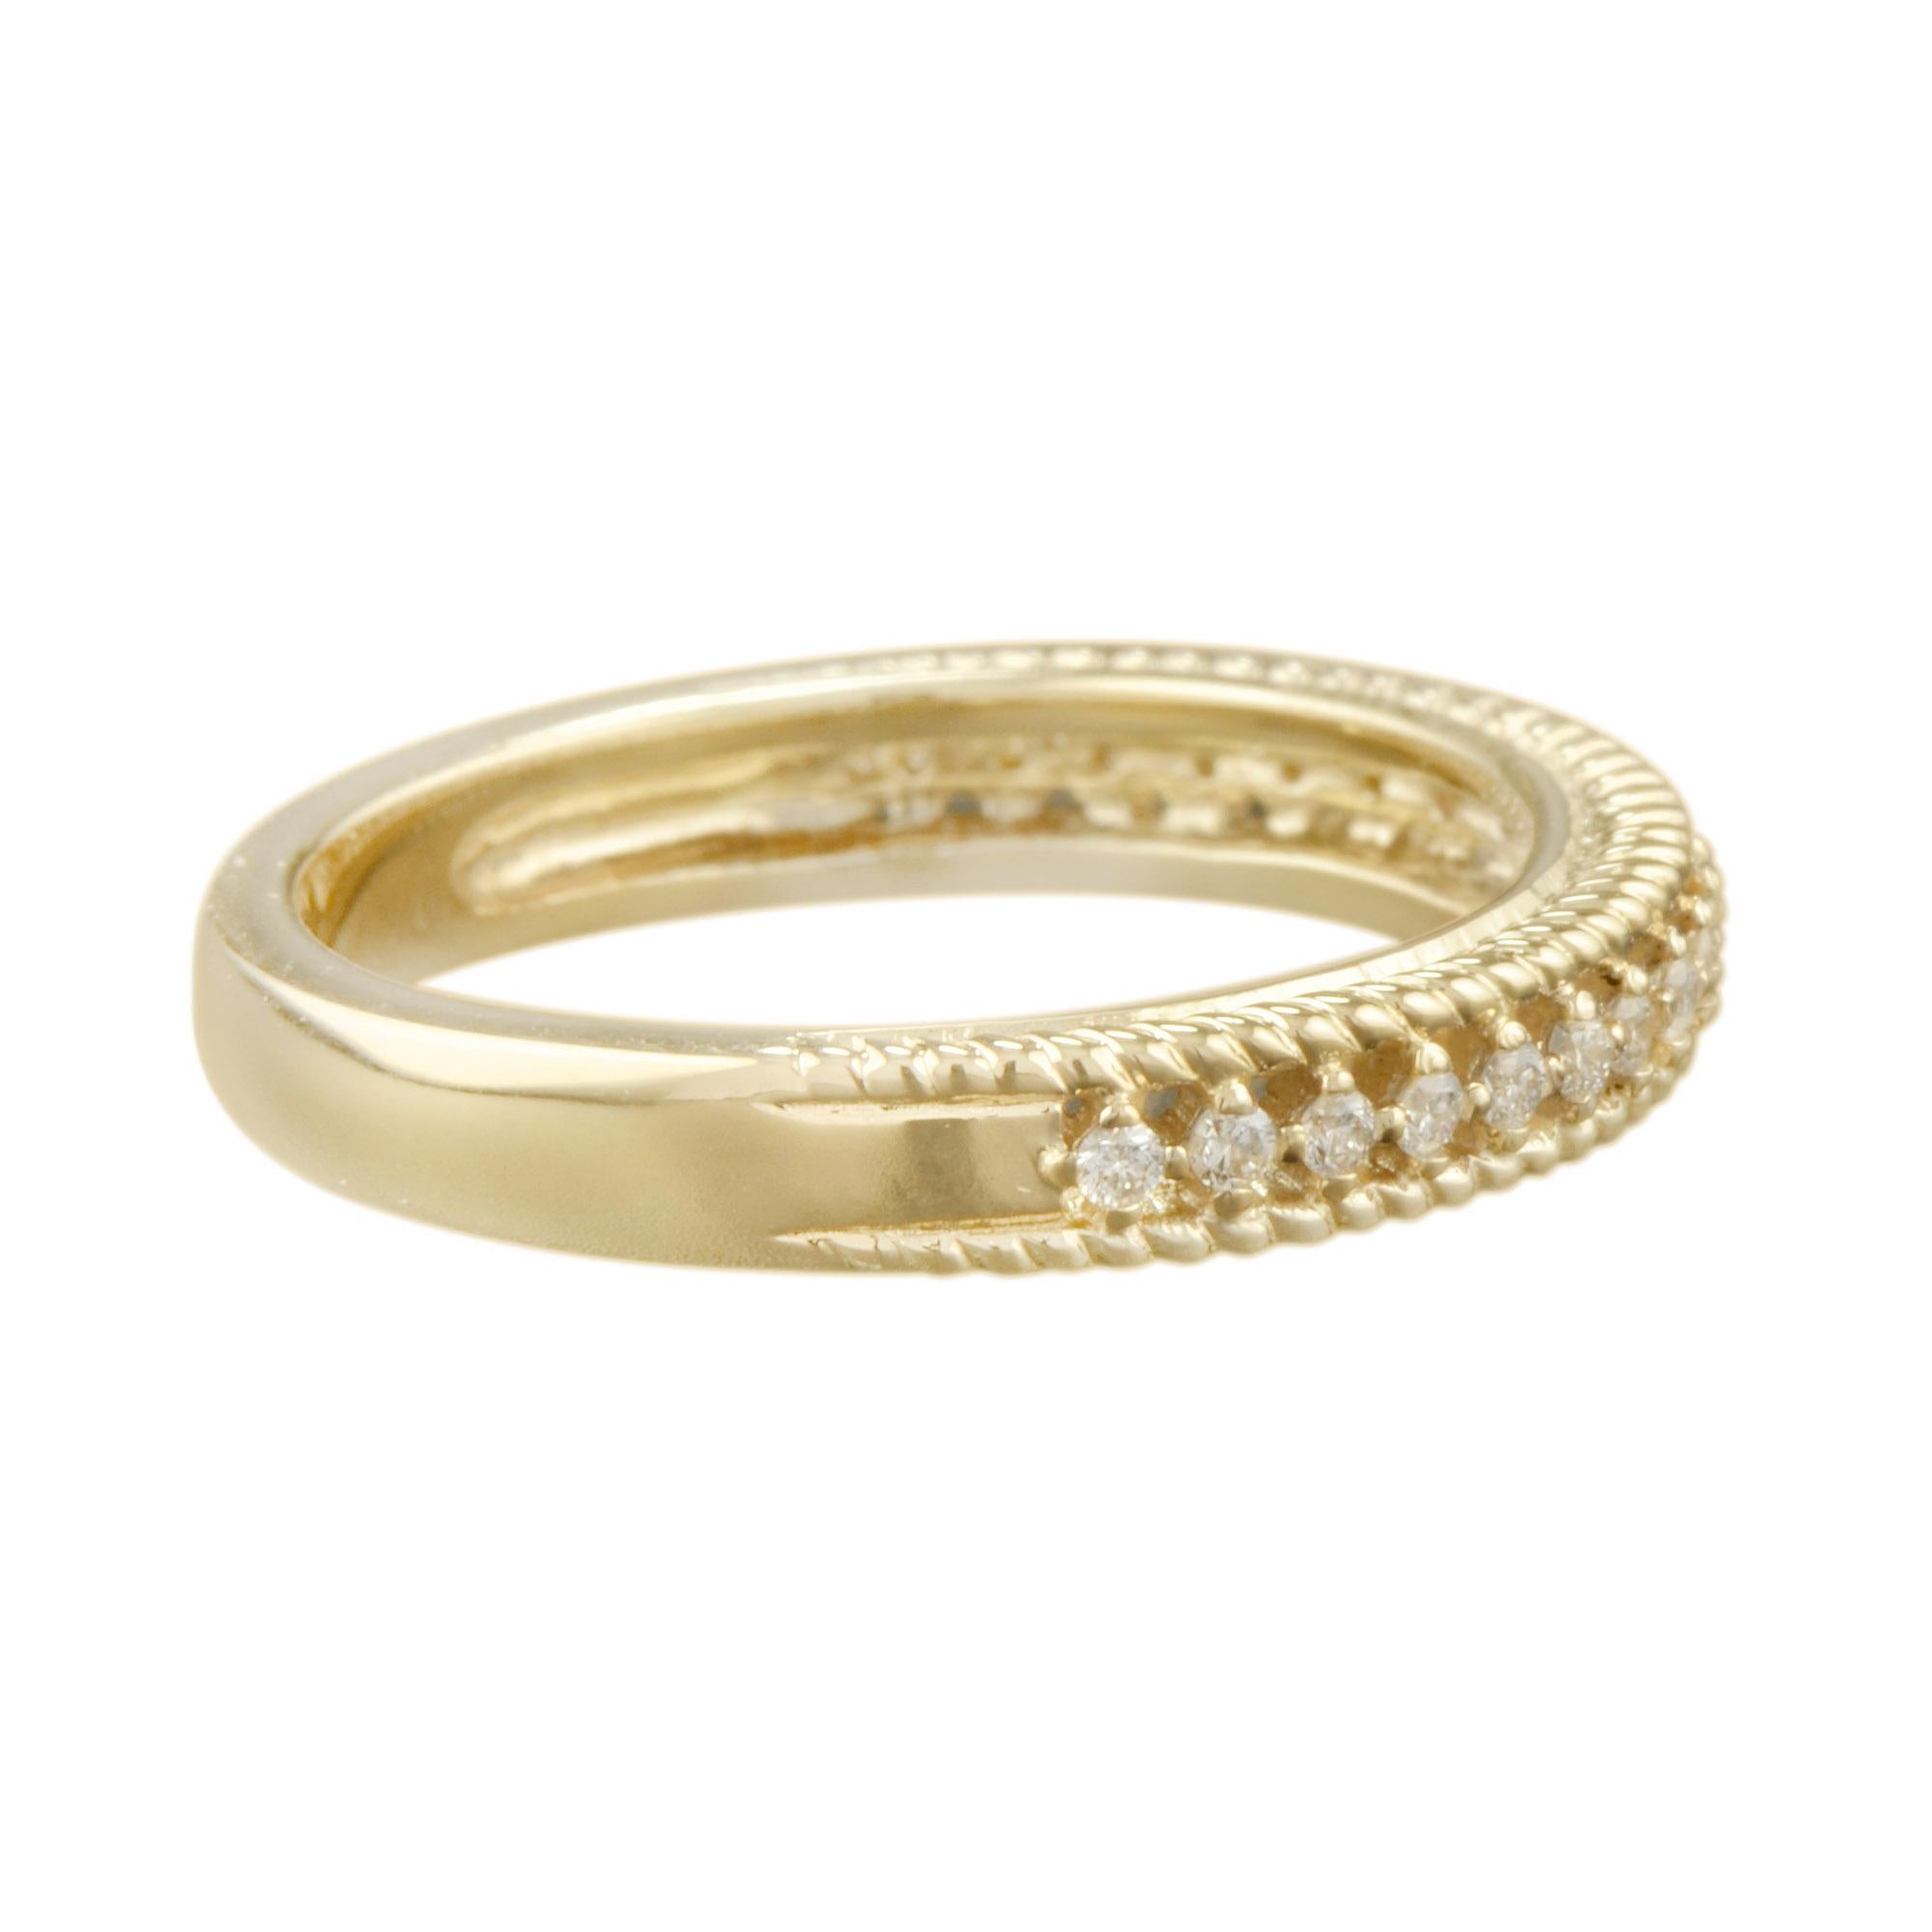 For Sale:  Vintage Style Diamond Half Eternity Wedding Band Ring in 14K Yellow Gold 3